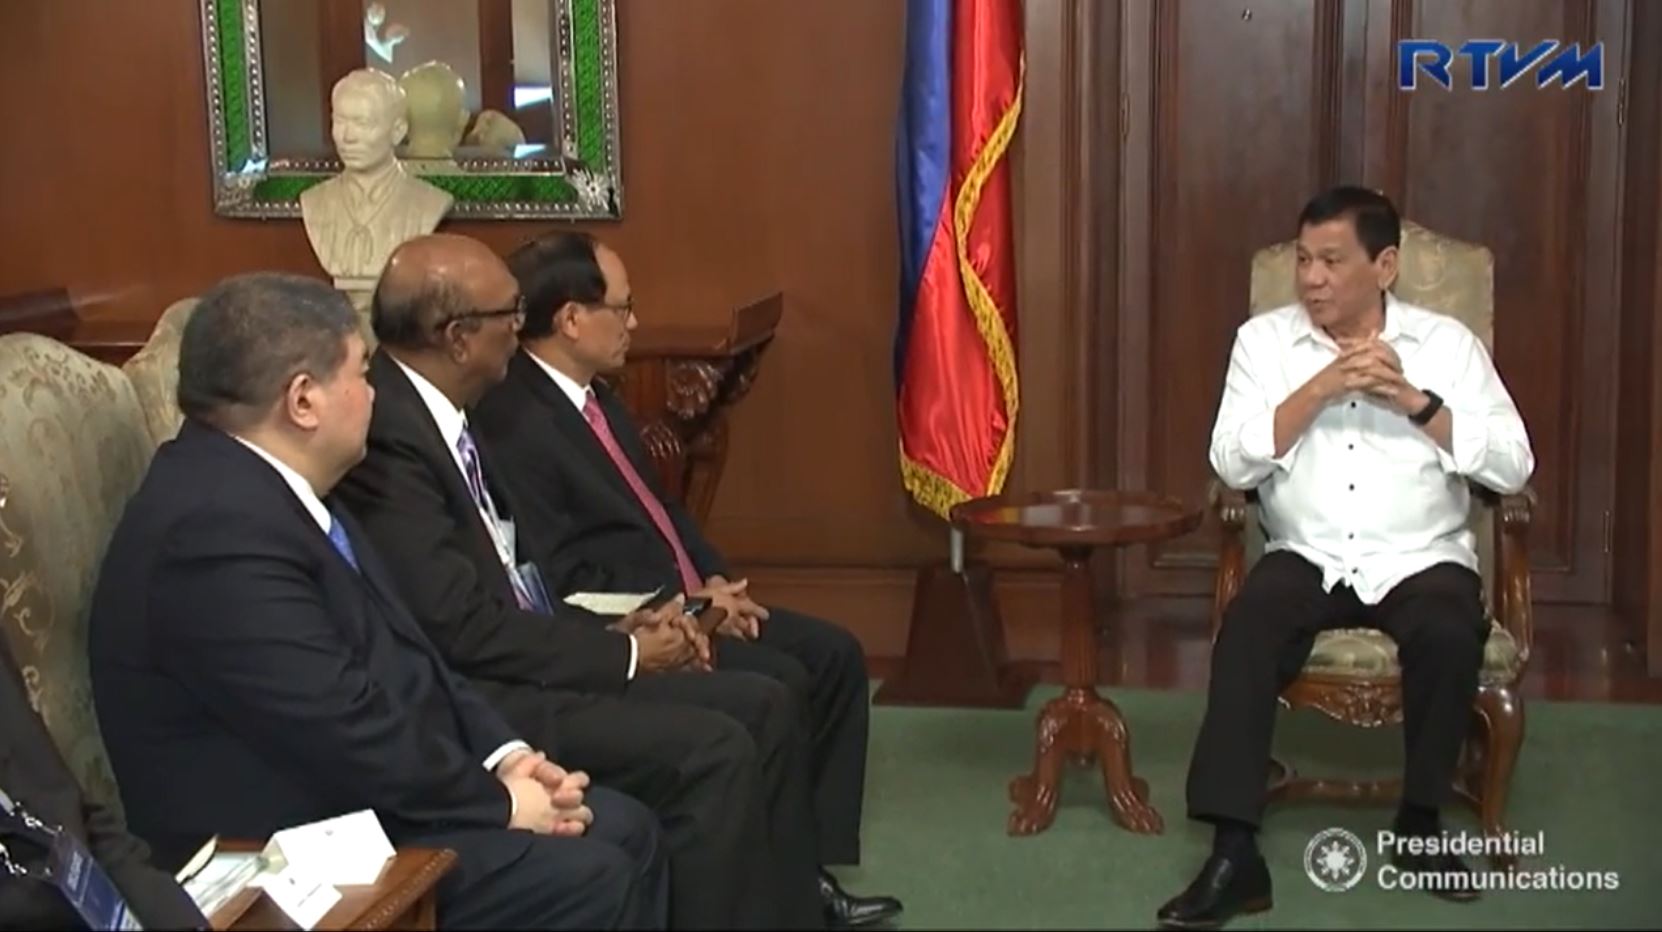 President Duterte receives the officials of the Association of Southeast Asian Nations (ASEAN) in Malacanang before he left for Cambodia and Singapore. (Photo grabbed from RTVM video)